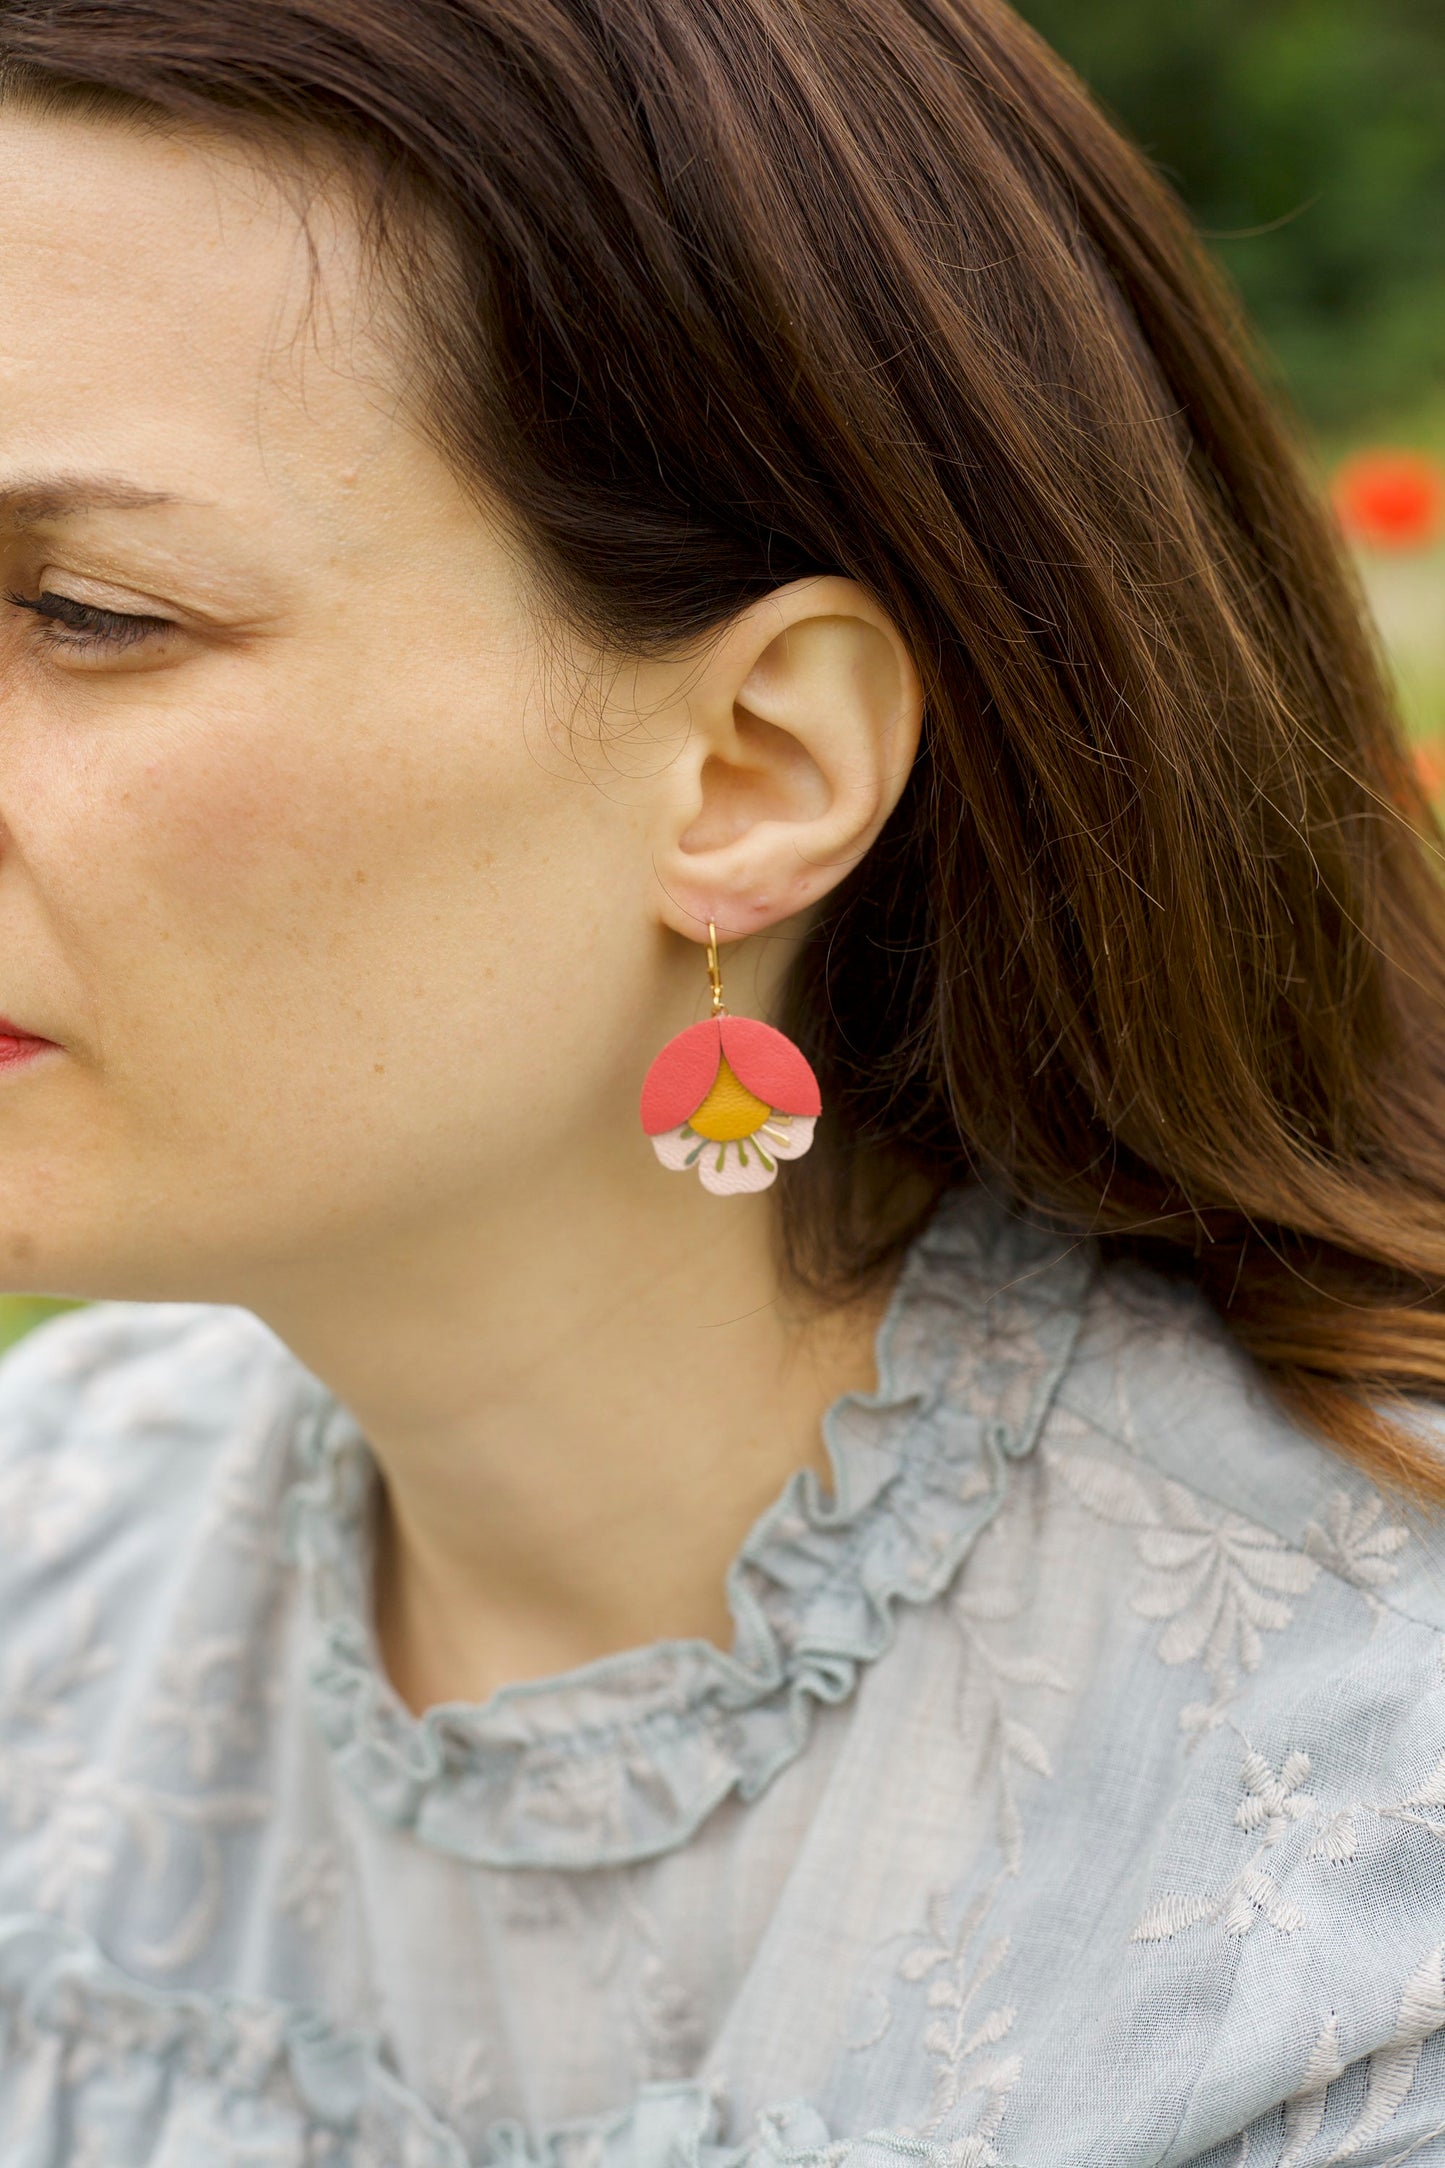 Off-white, copper red, yellow Cherry Blossom earrings